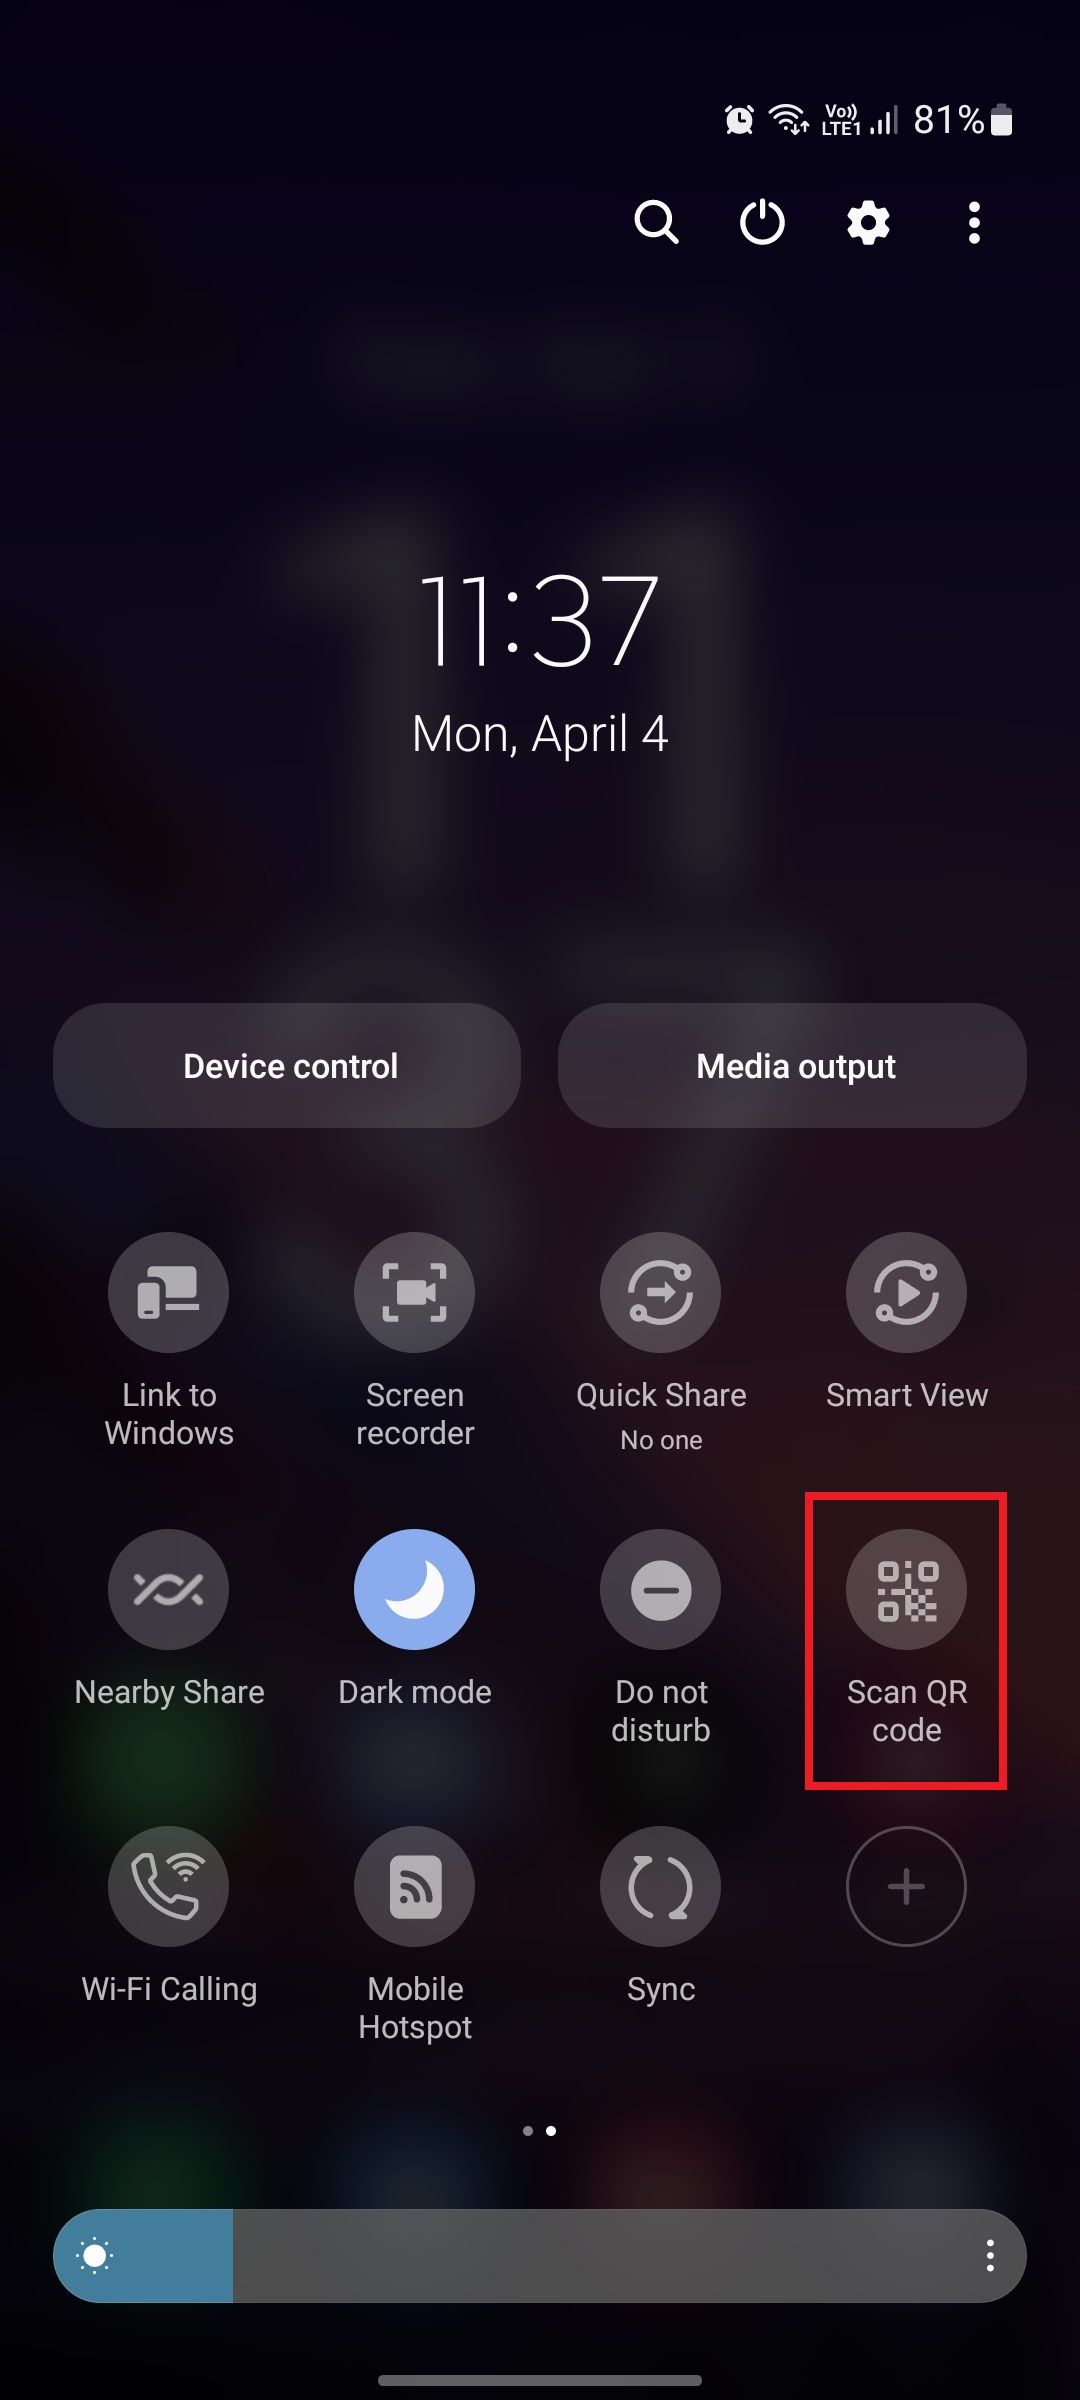 Samsung scan QR code button in quick settings panel